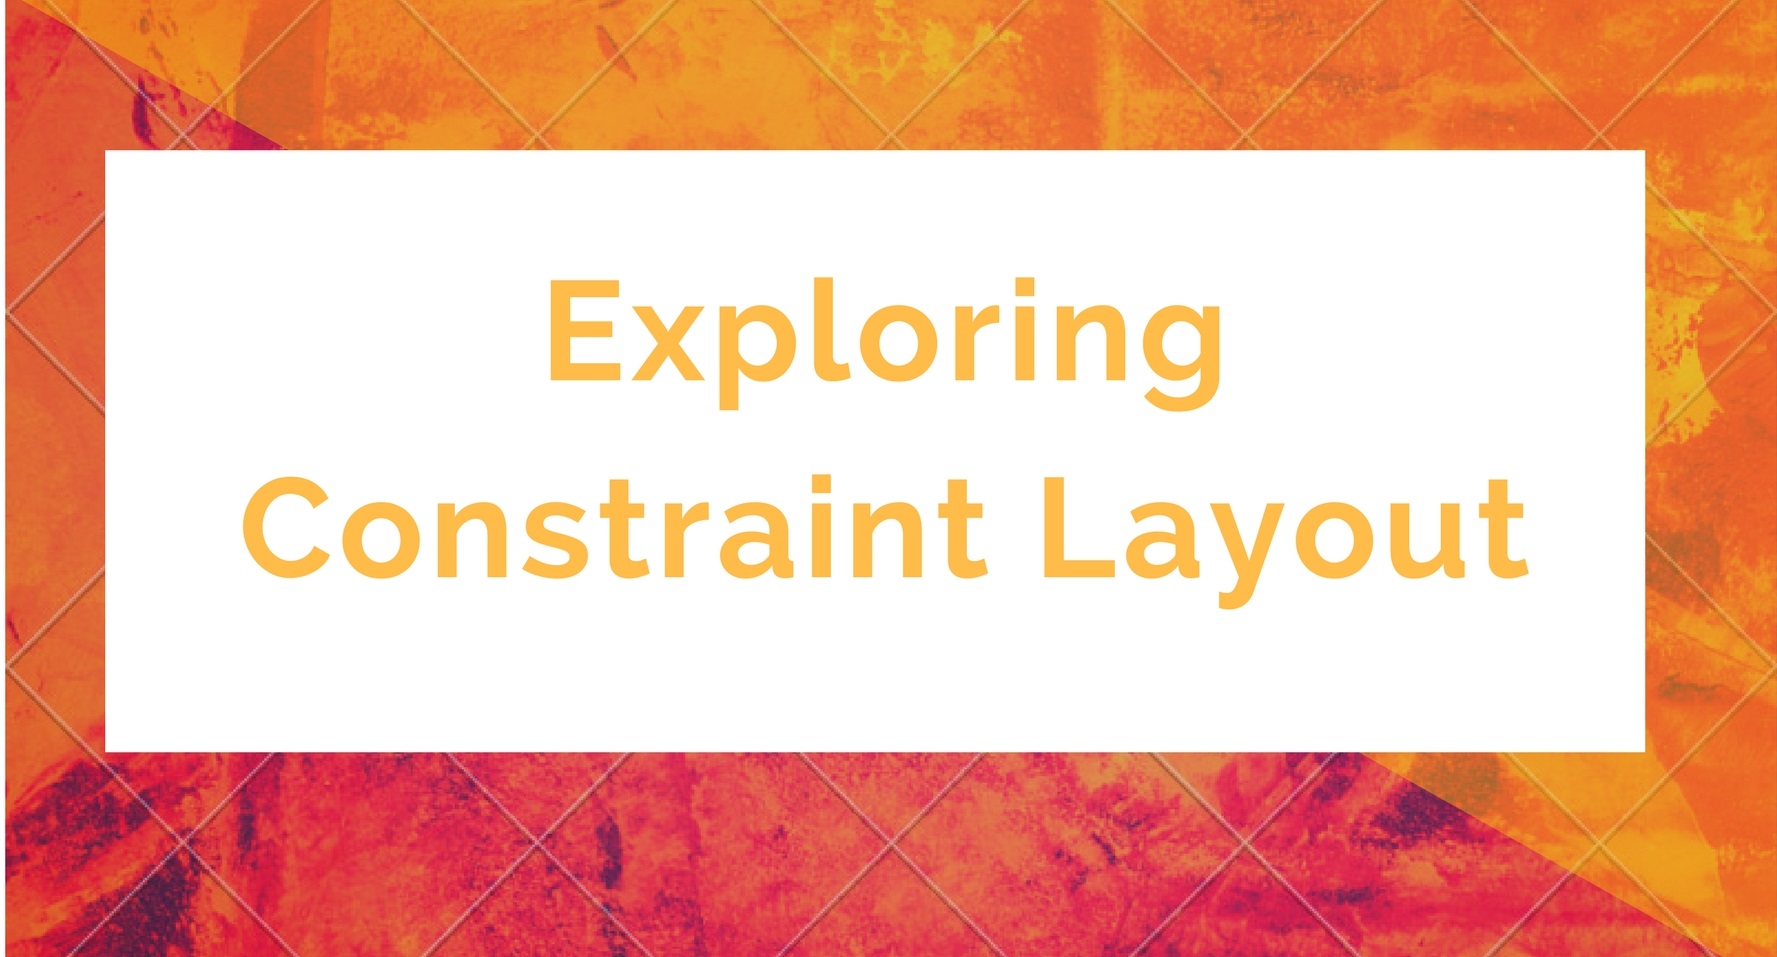 Exploring ConstraintLayout in Android